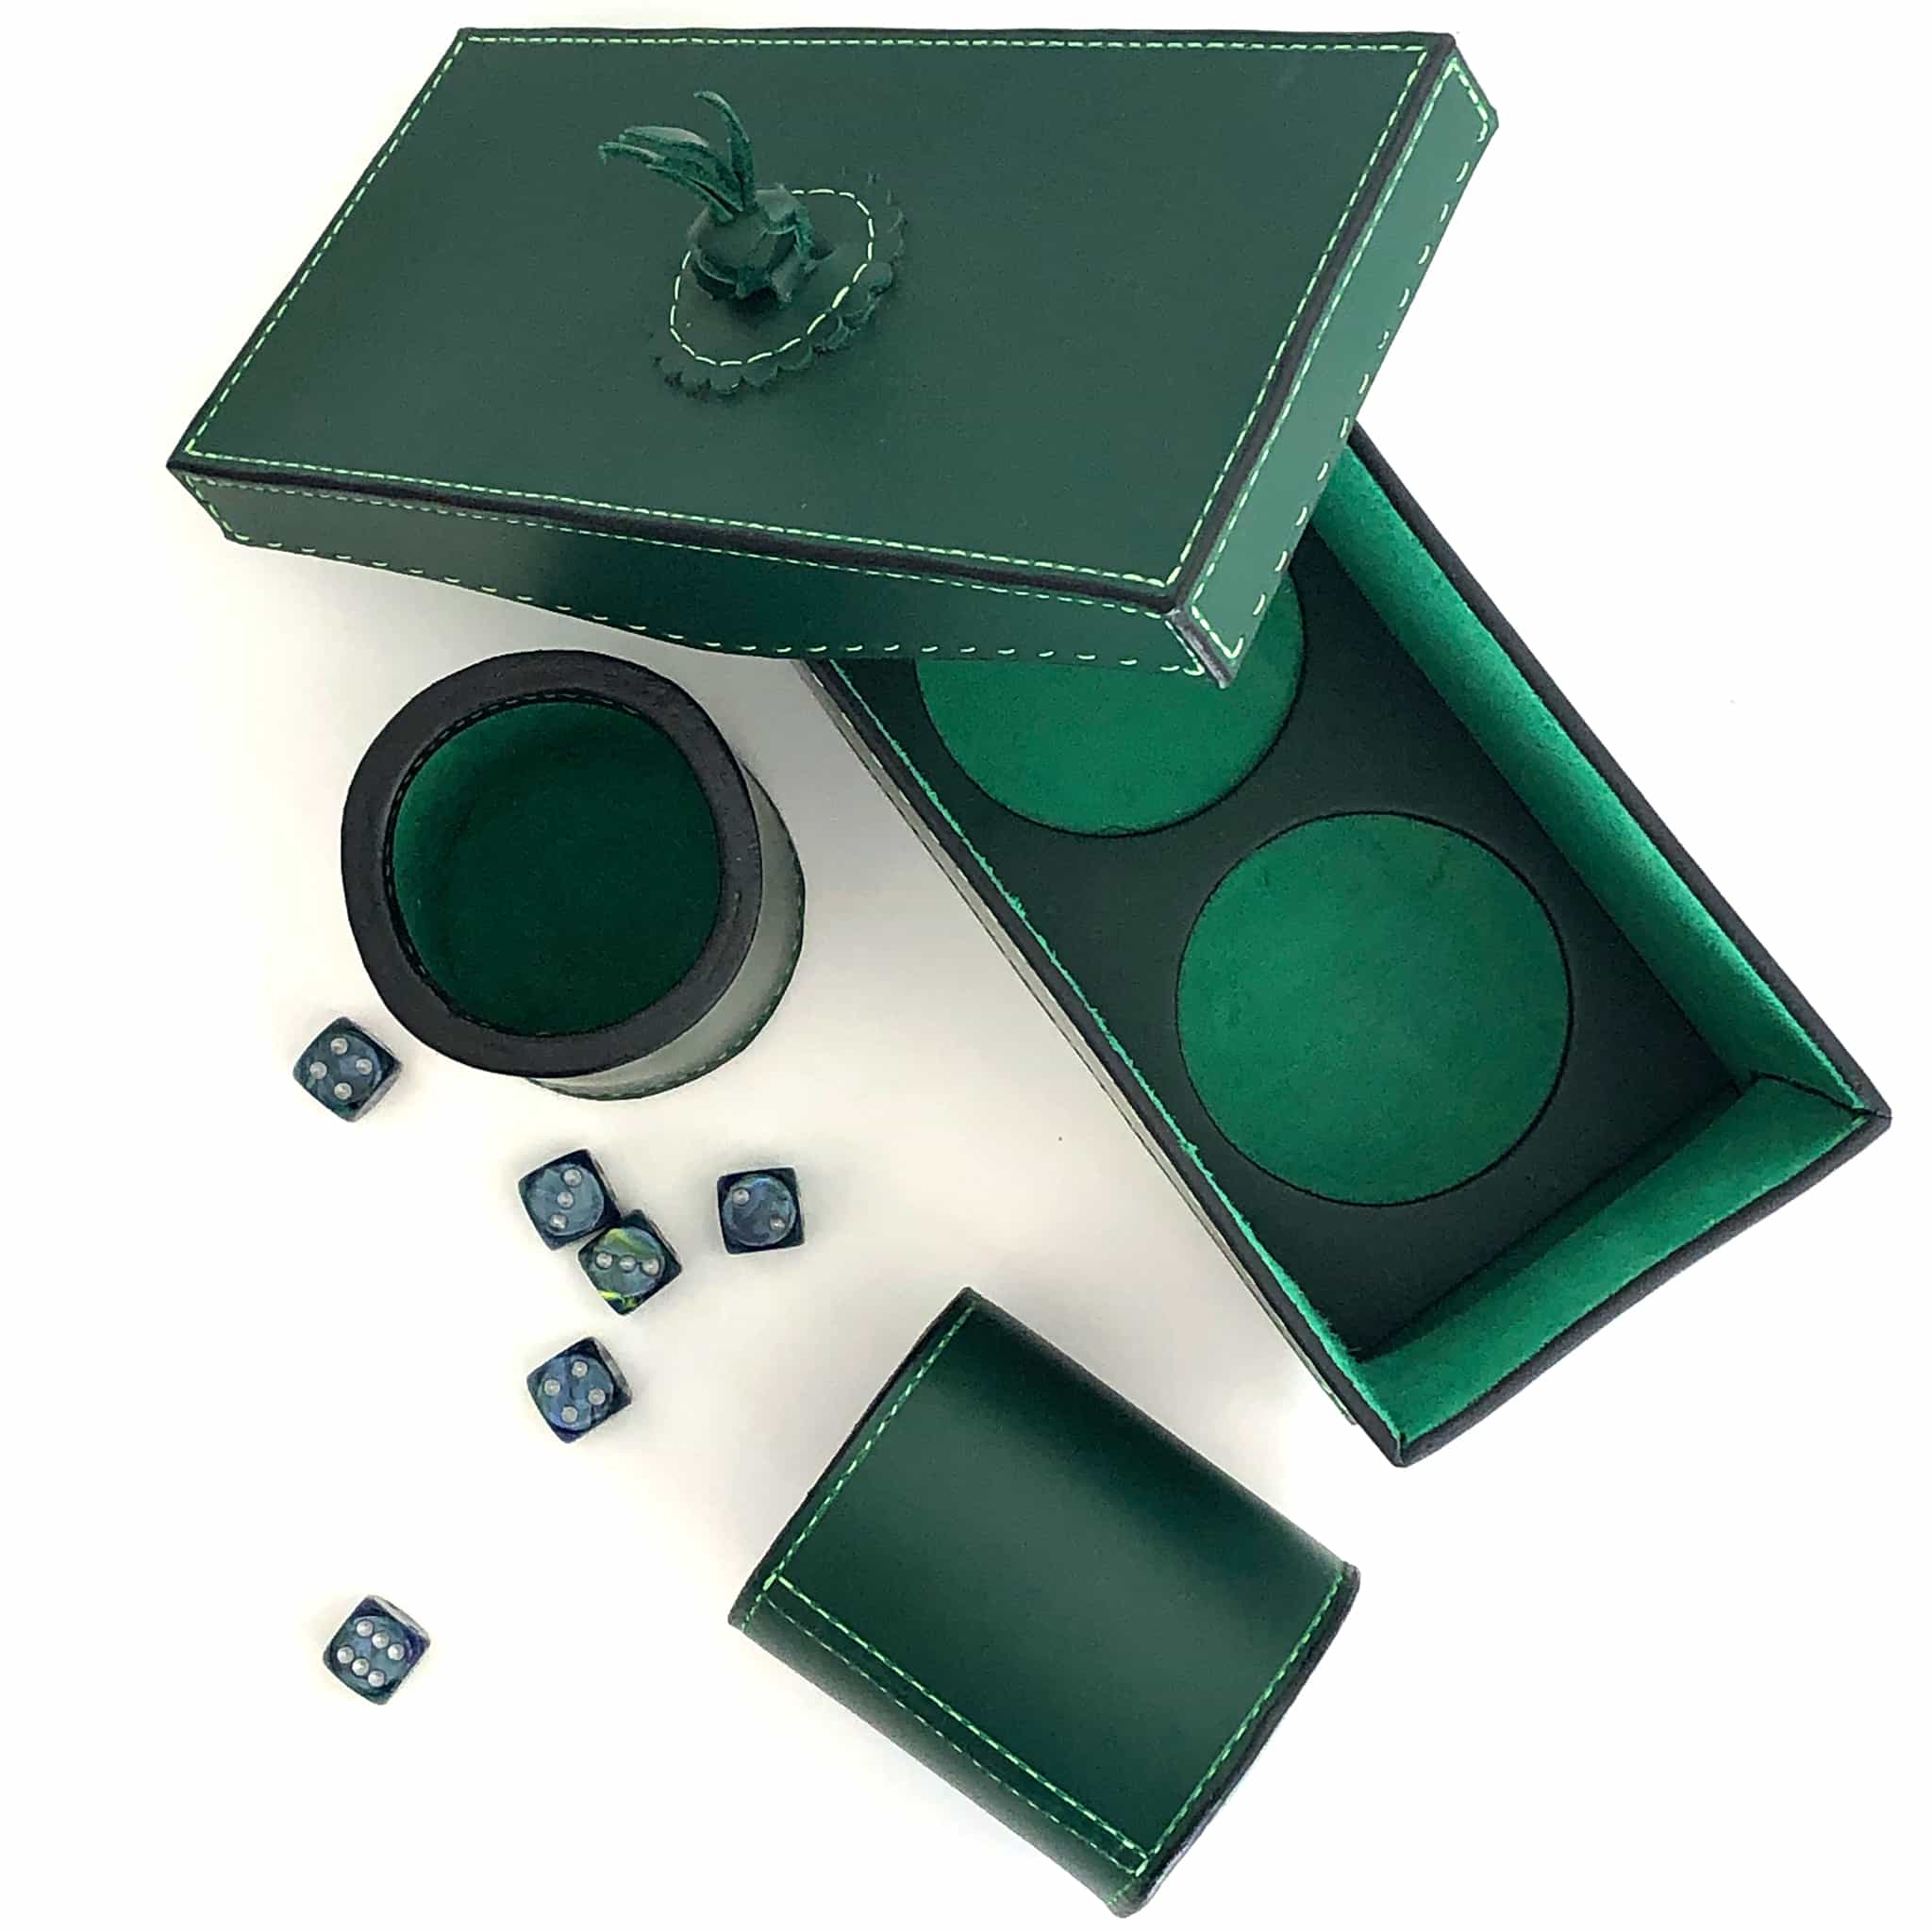 Dice cups and game box in forrest green with dice viewed from the top